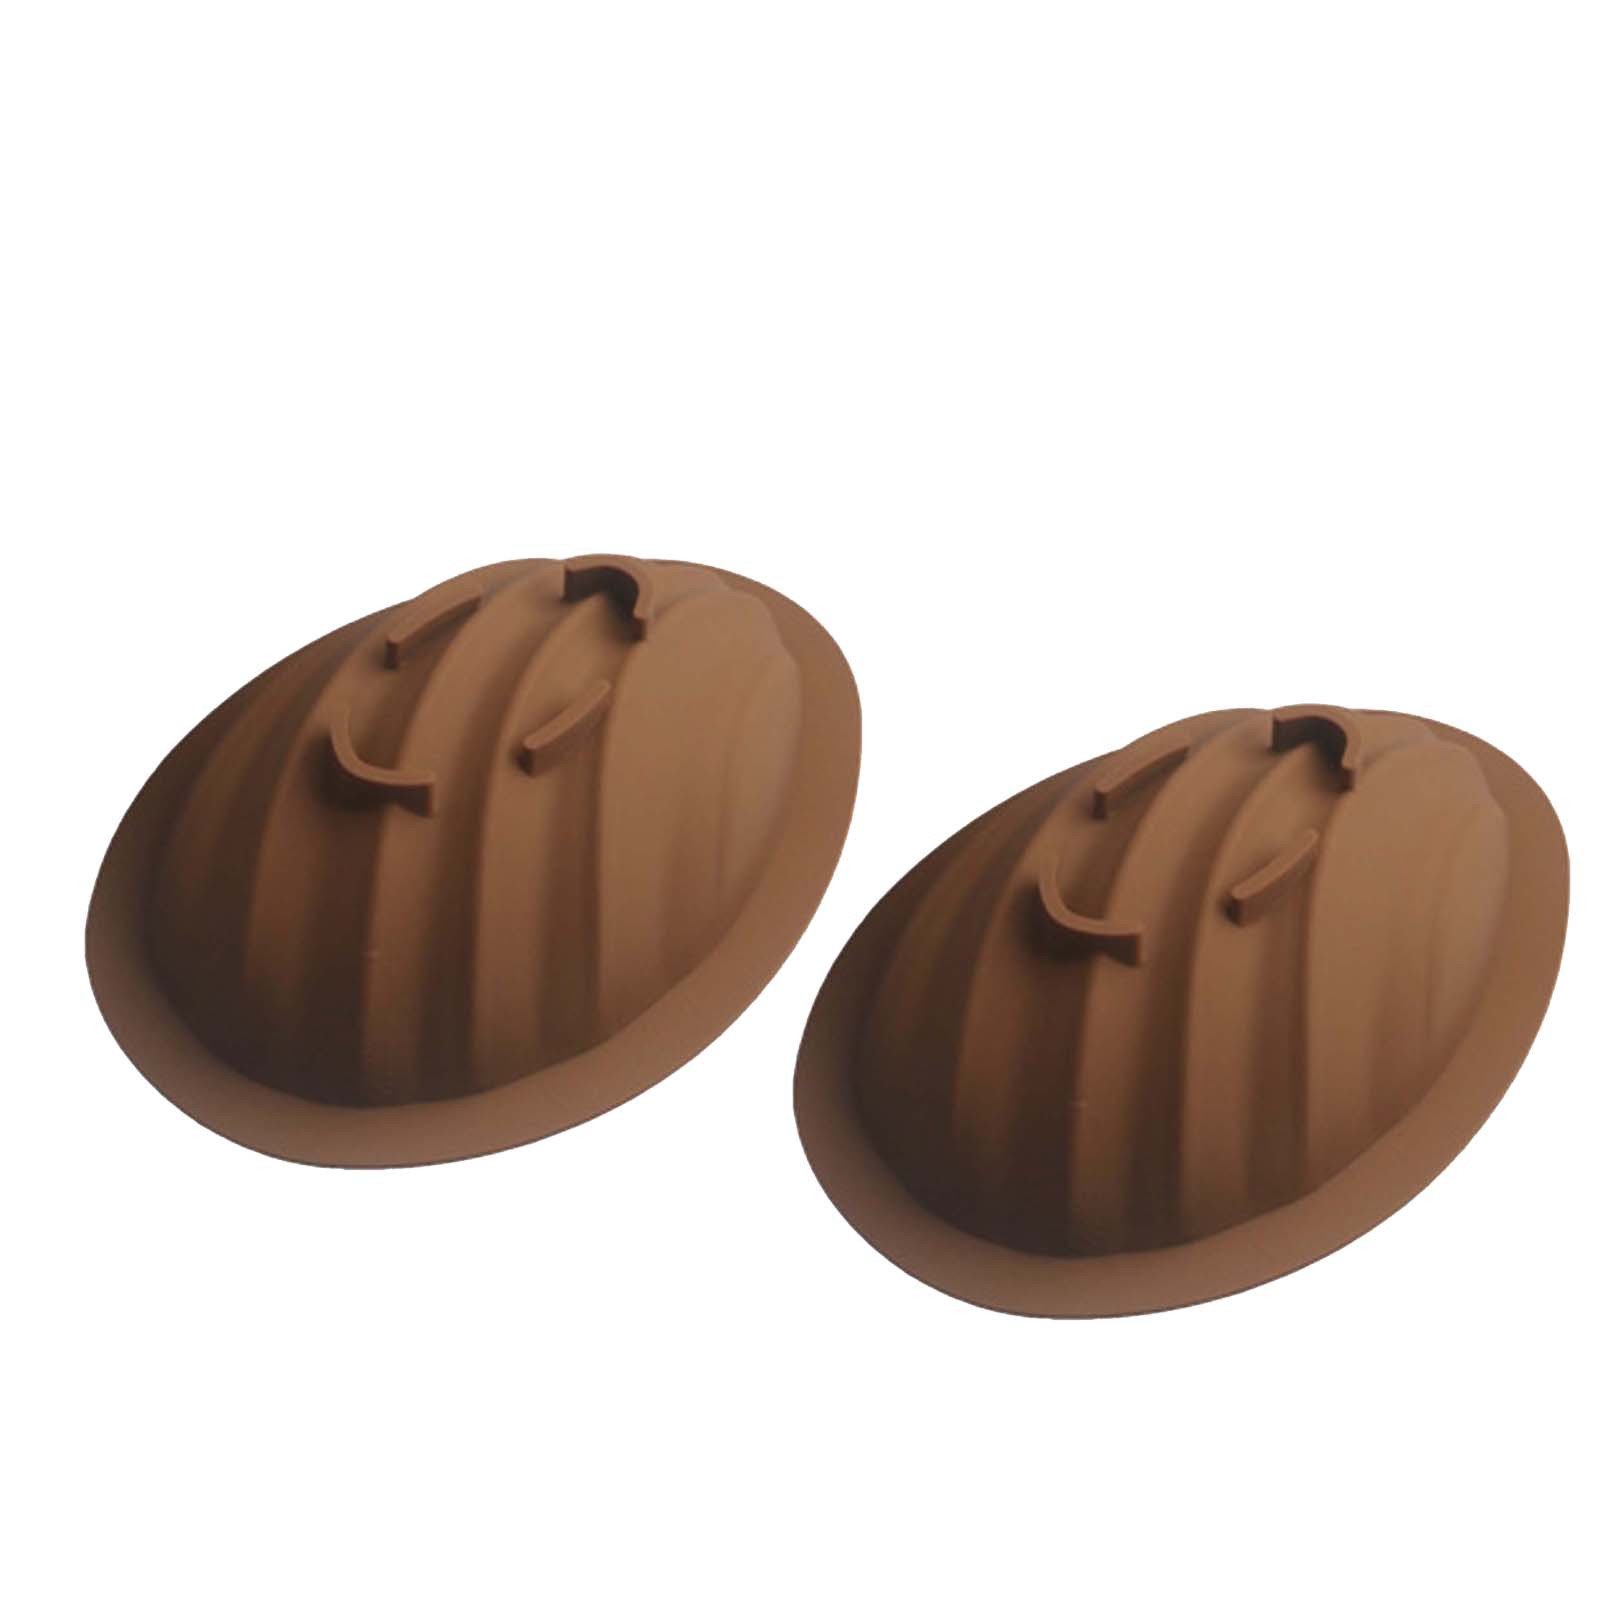 Dengmore 6inch Easter Eggs Chocolate Silicone Molds 2 Pack Large